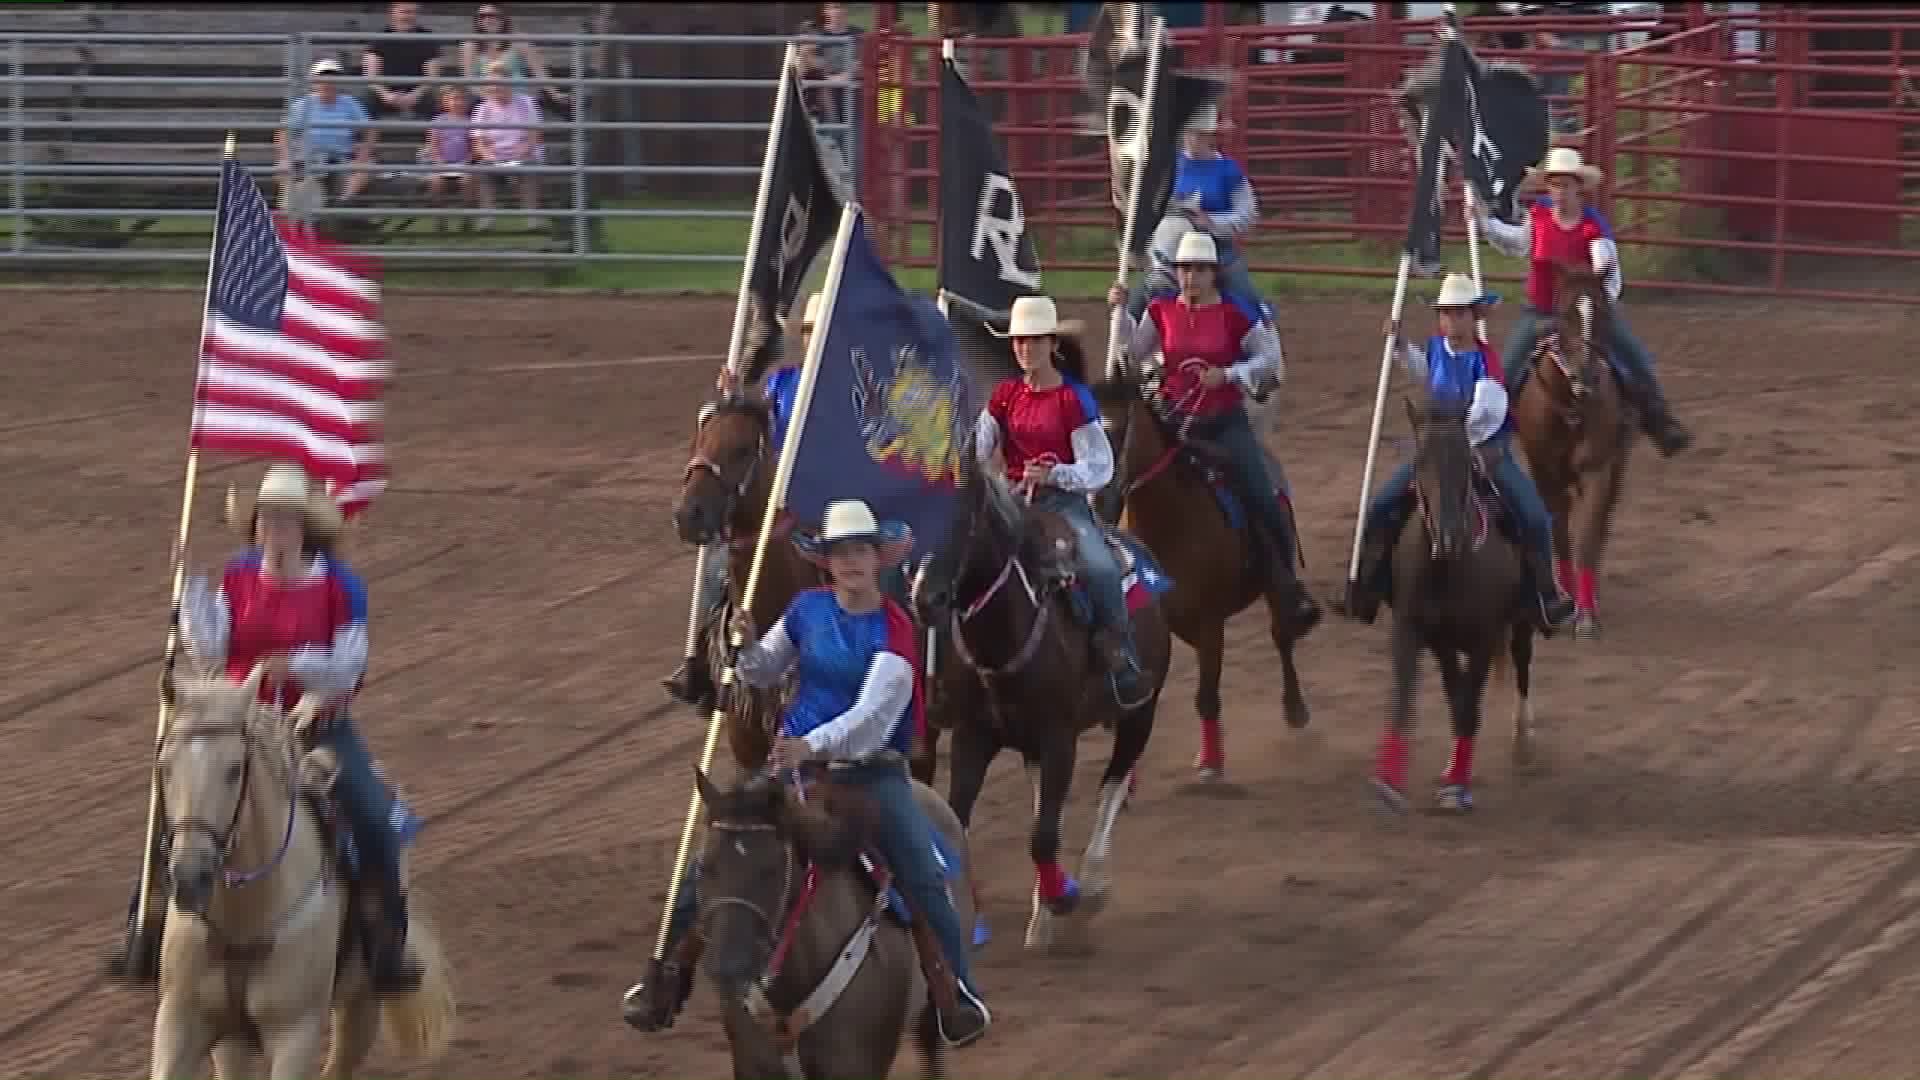 The Rodeo is Back in Columbia County